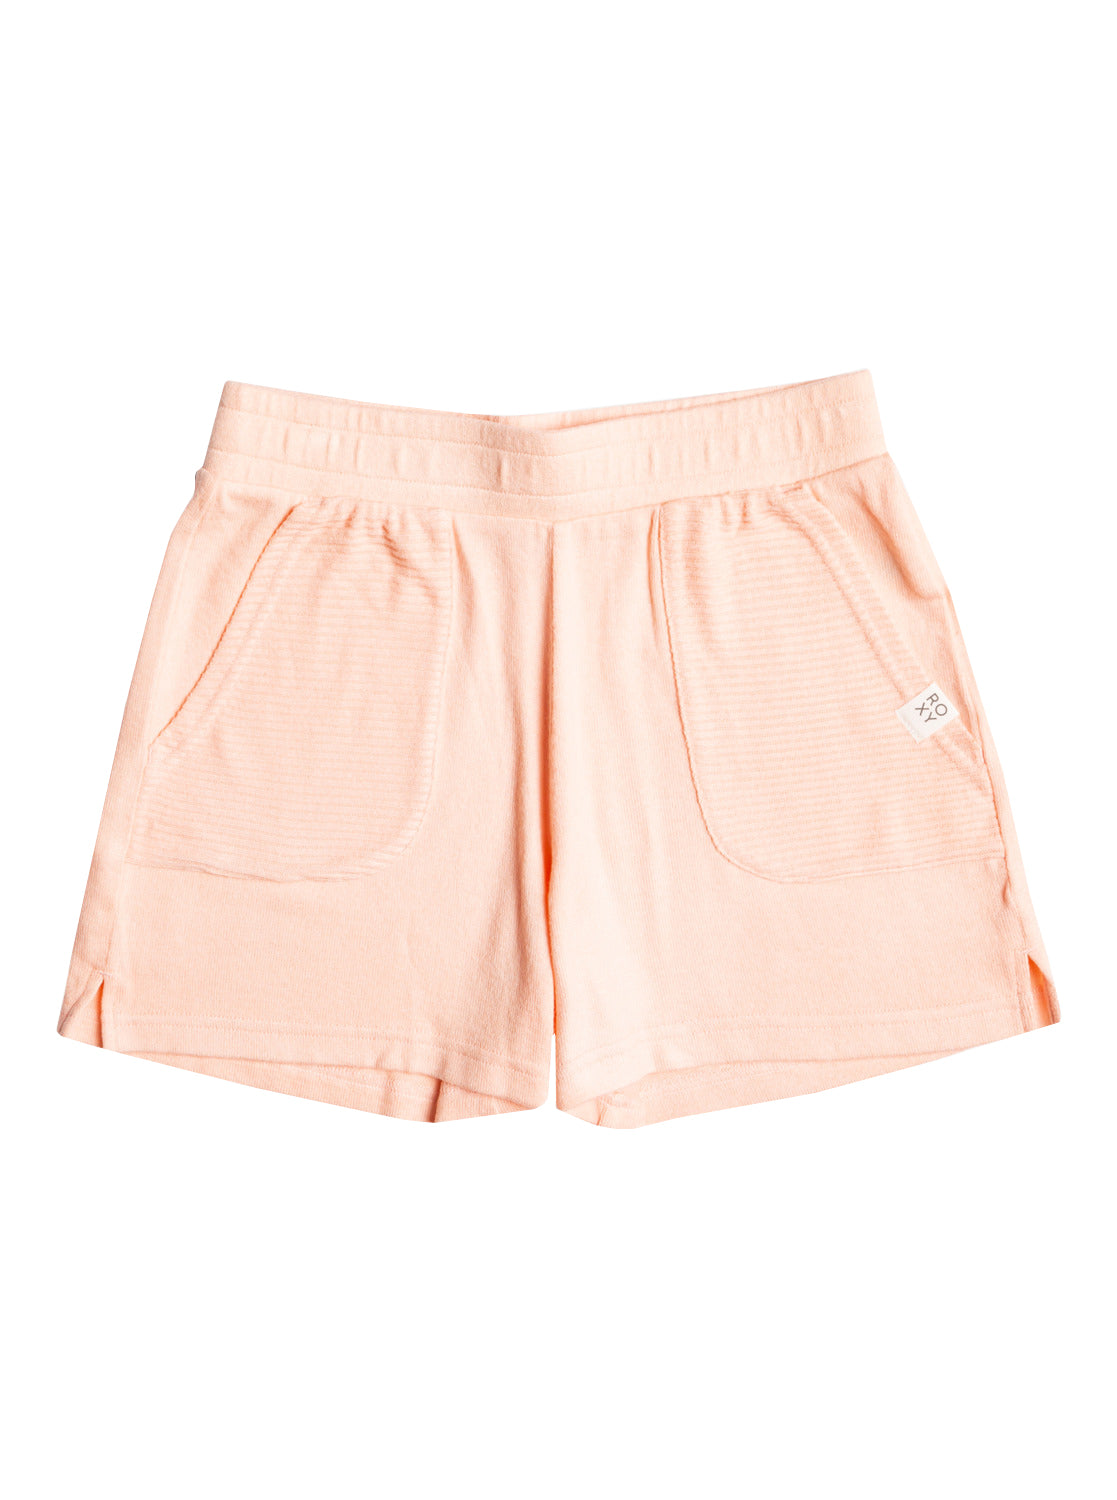 Roxy All The Little Lights Shorts MDR0 8/S